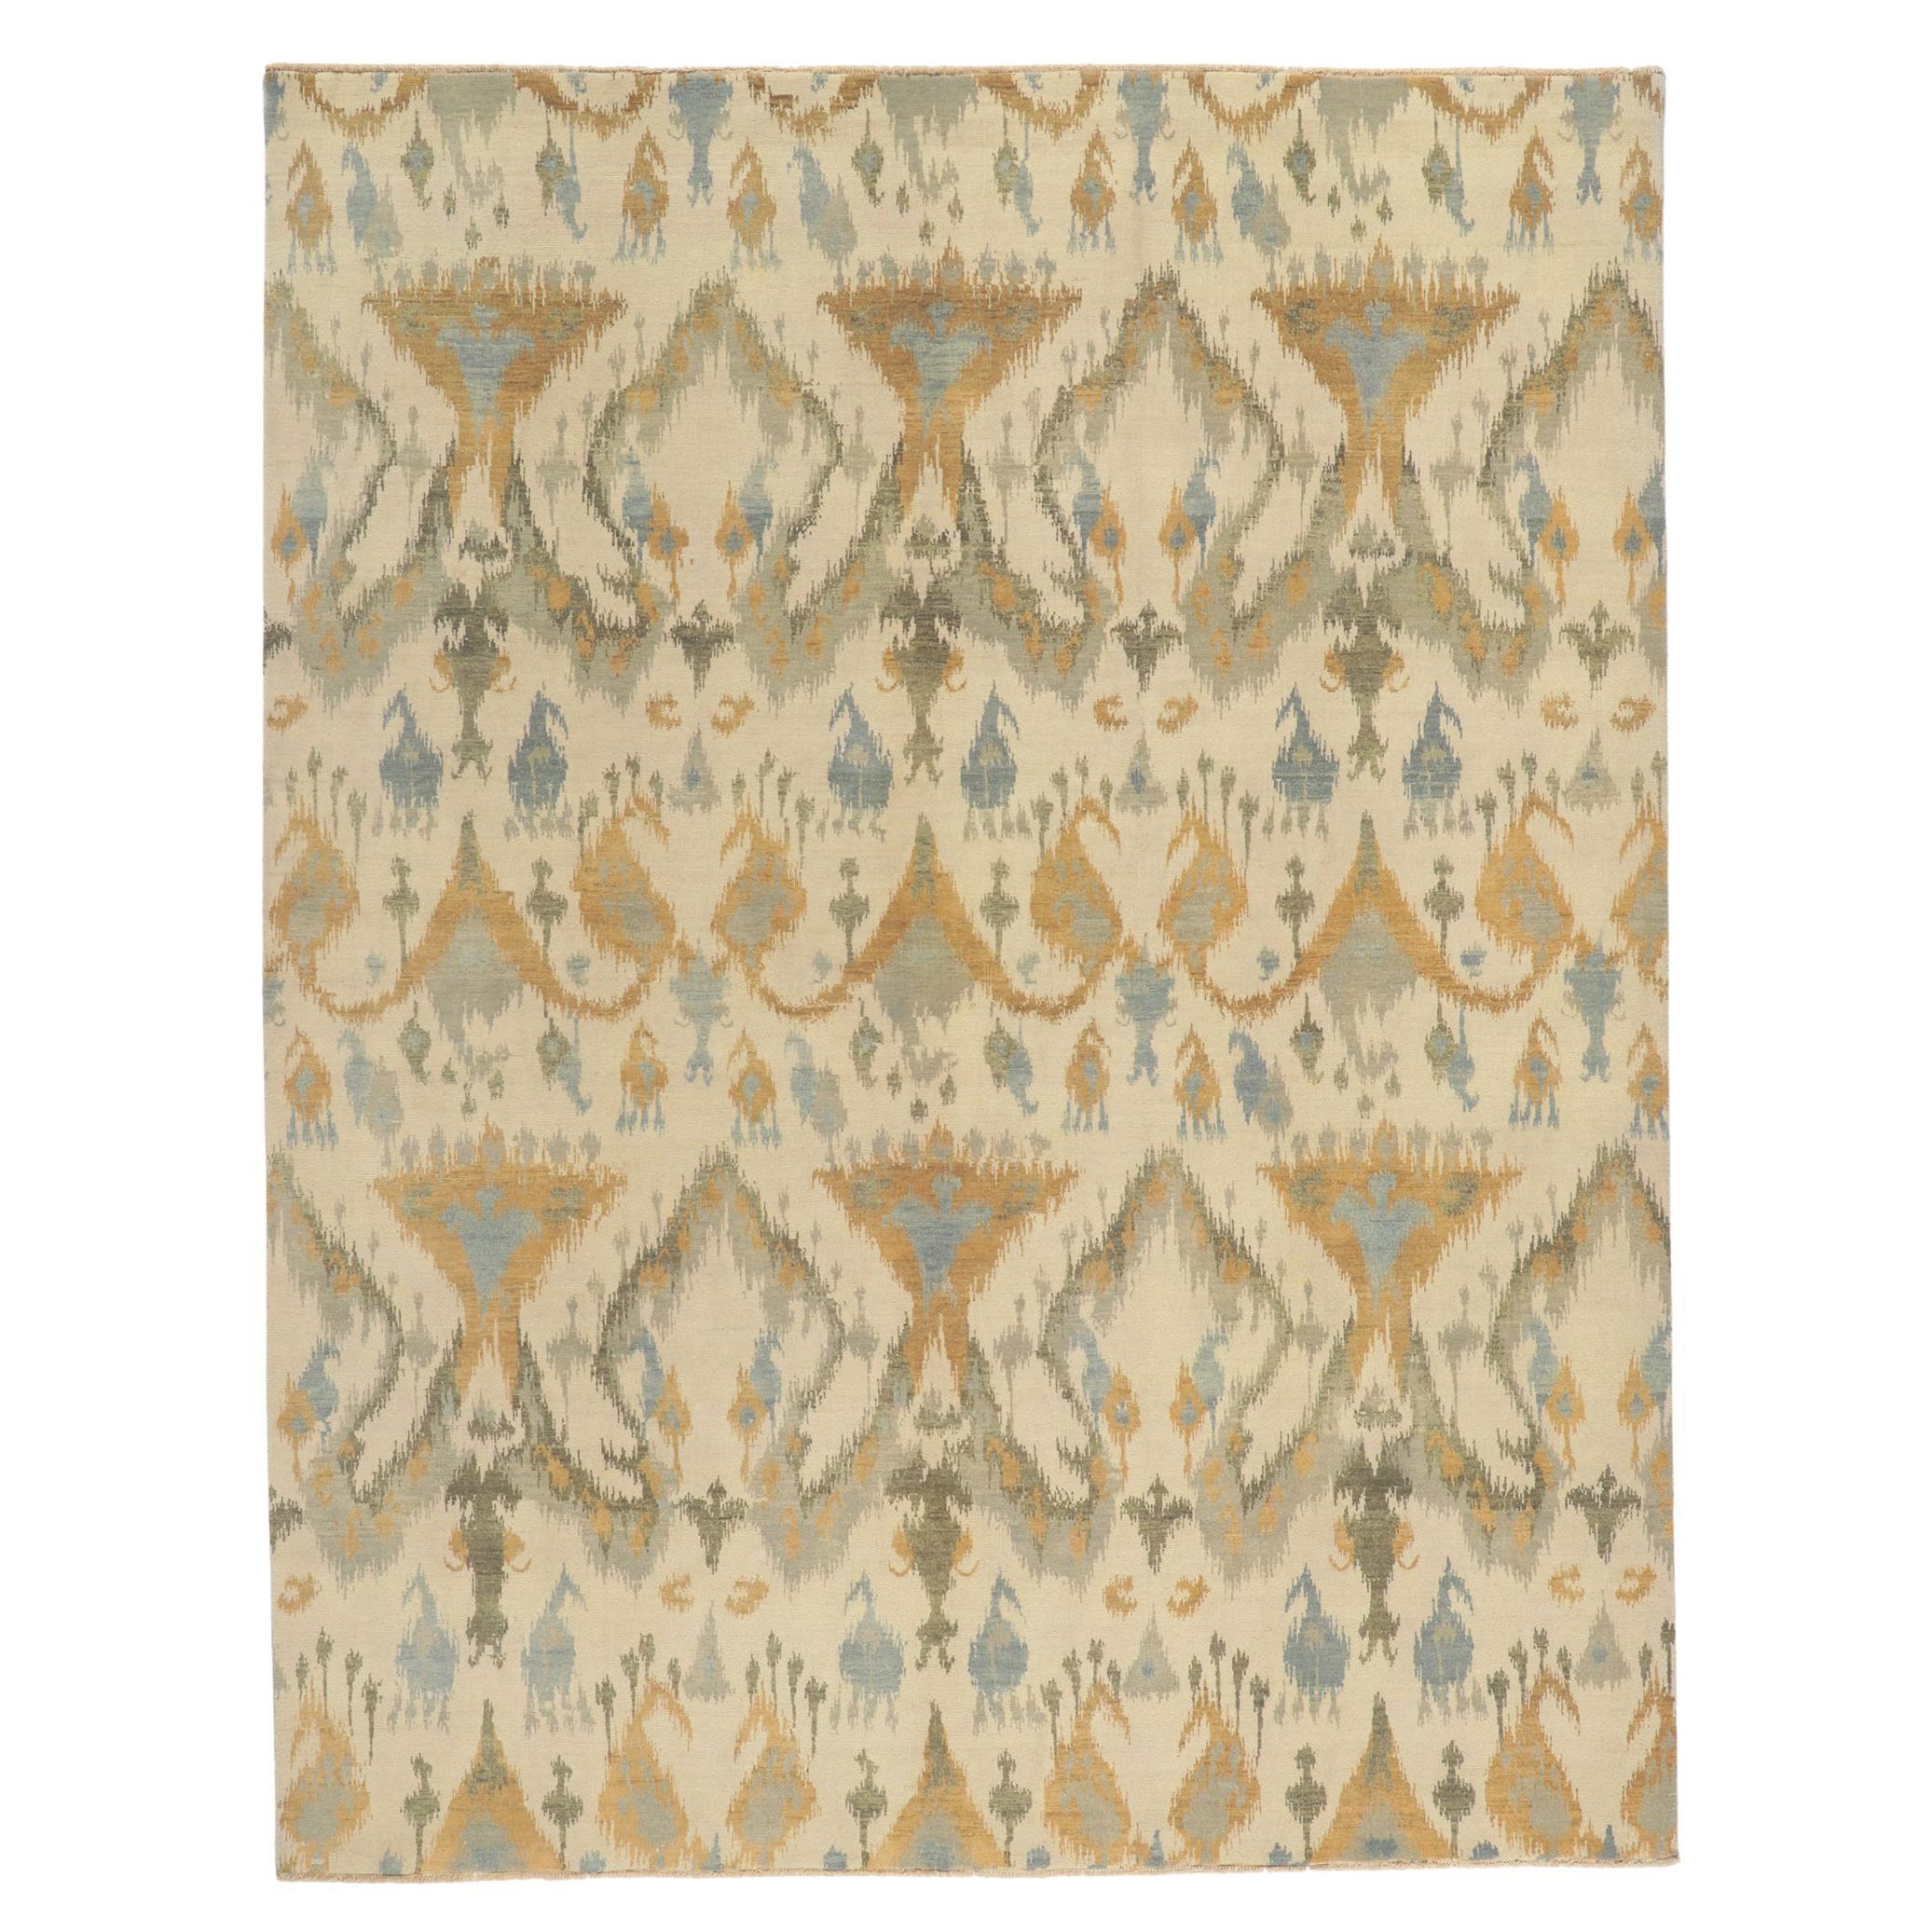 New Earth-Tone Ikat Rug with Modern Style